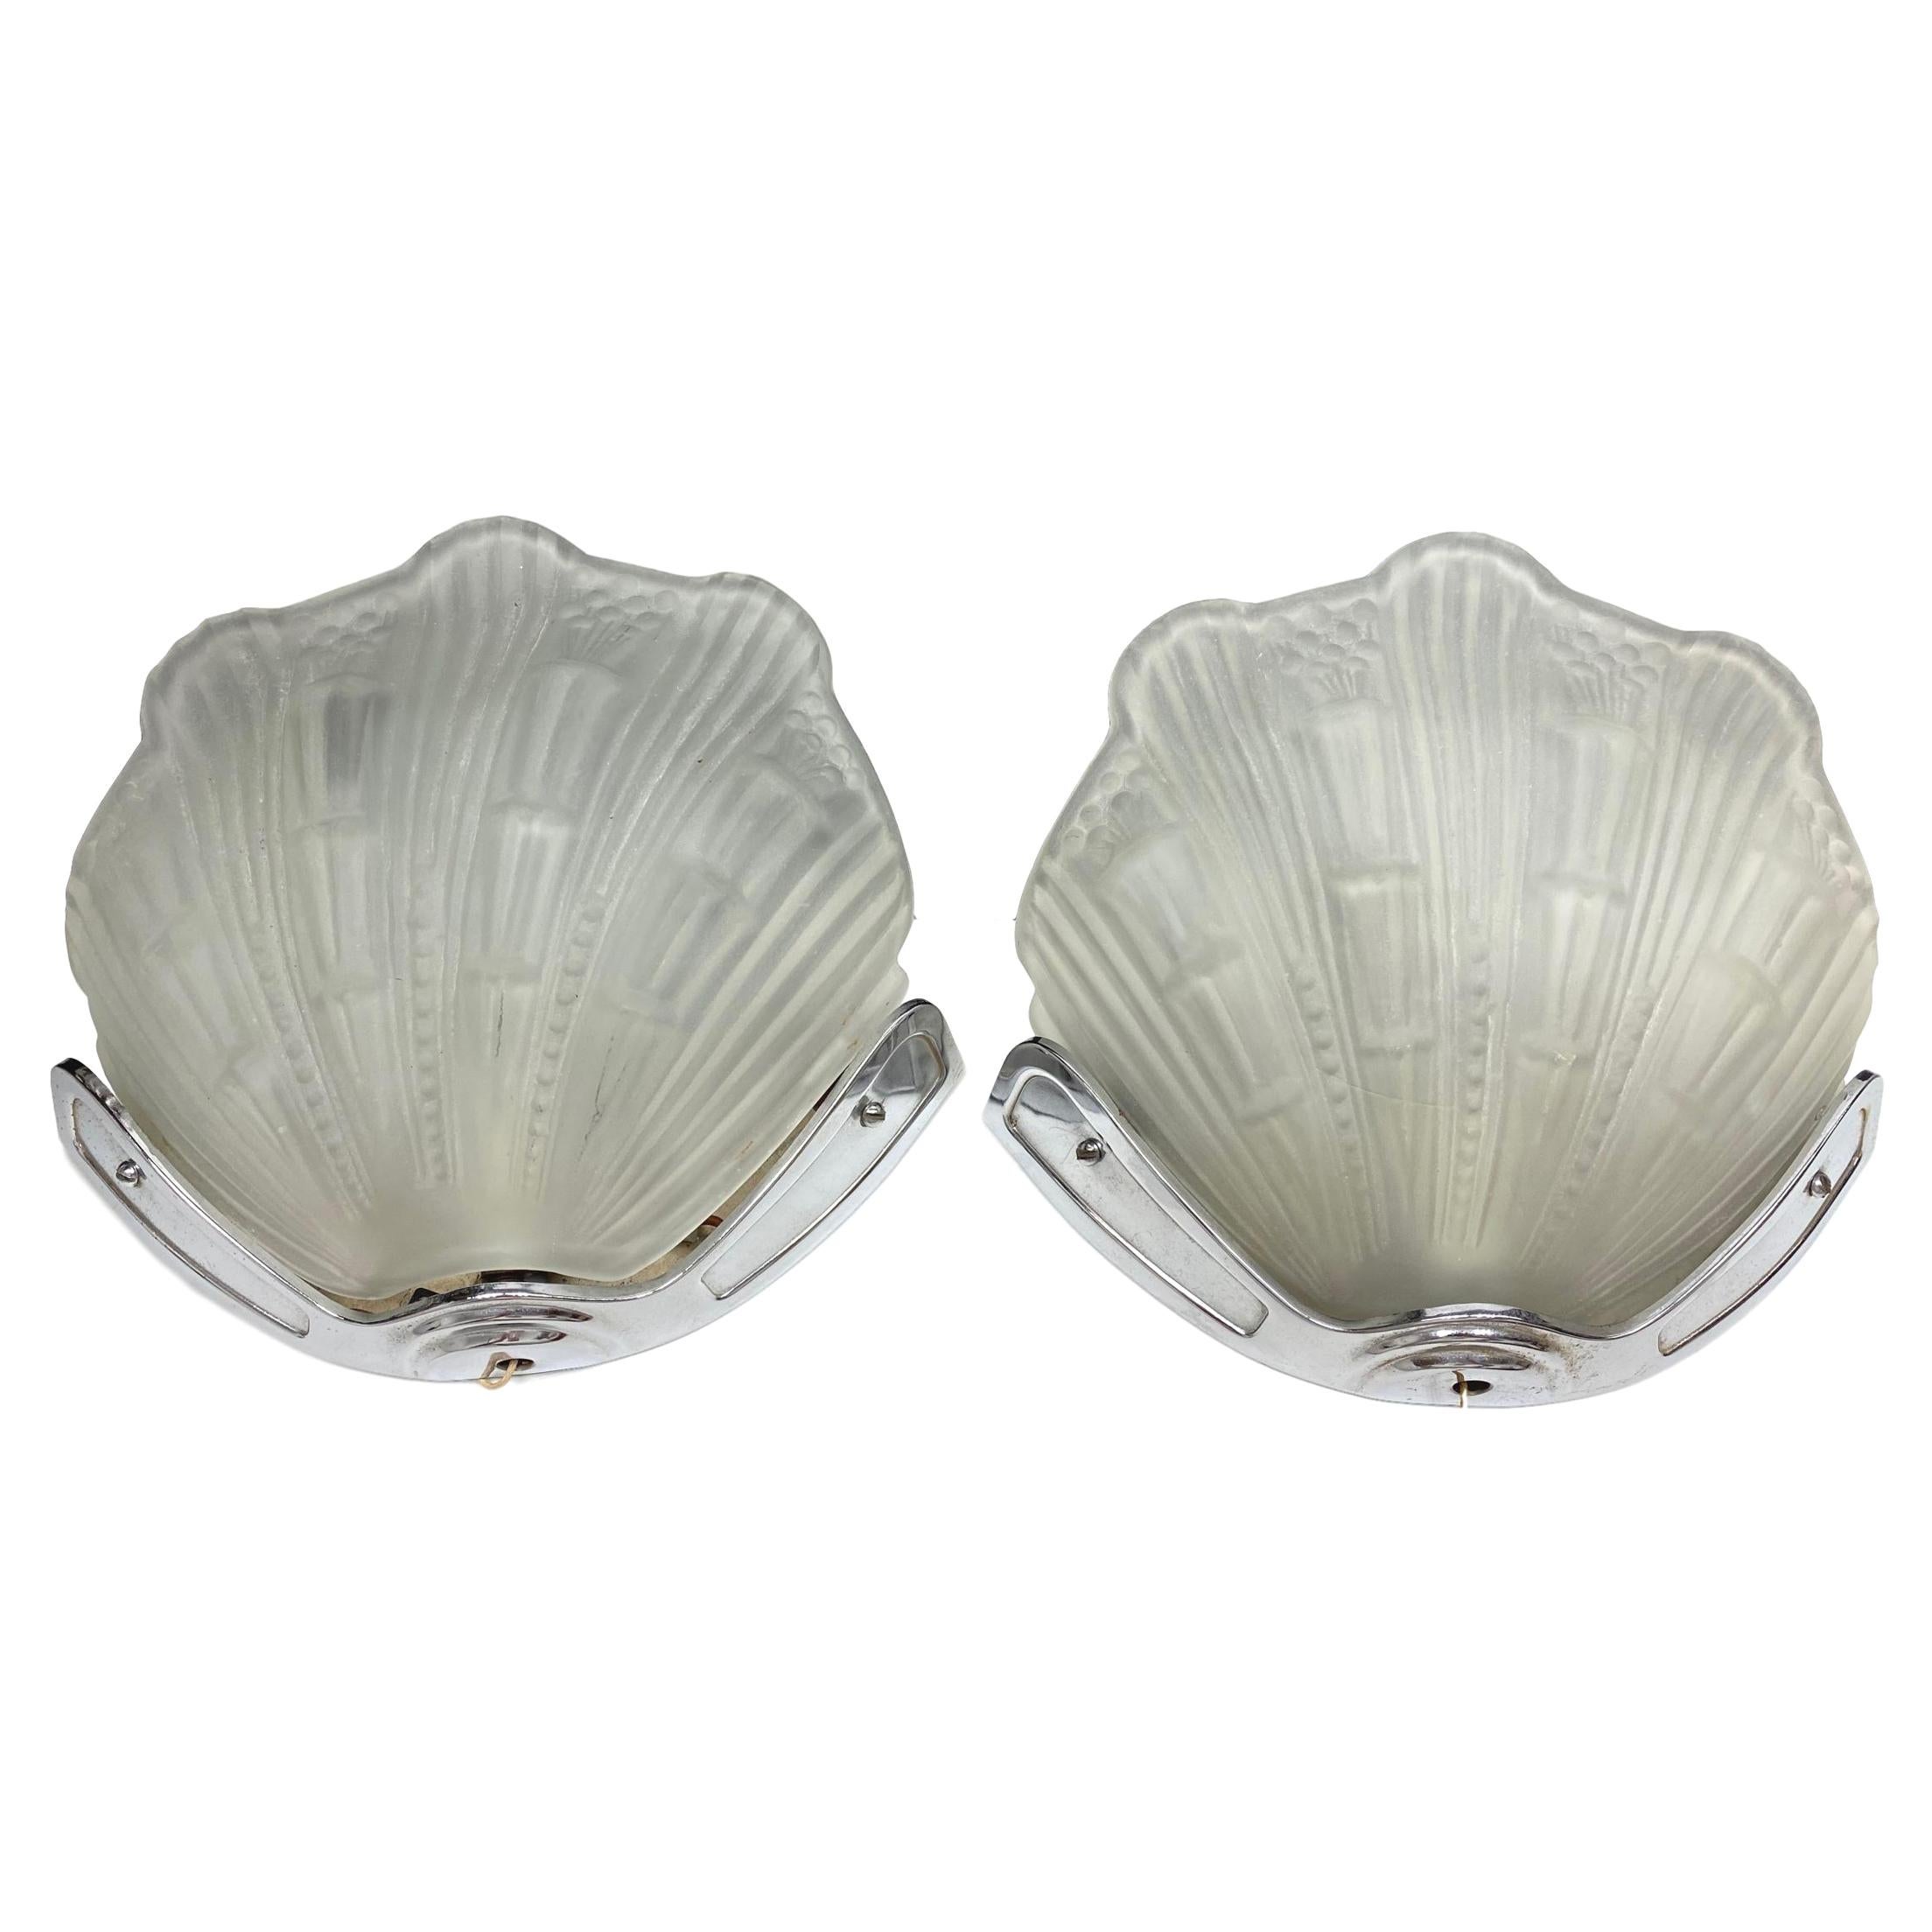 Pair of Art Deco Style Sconces with Stylised Shell Design